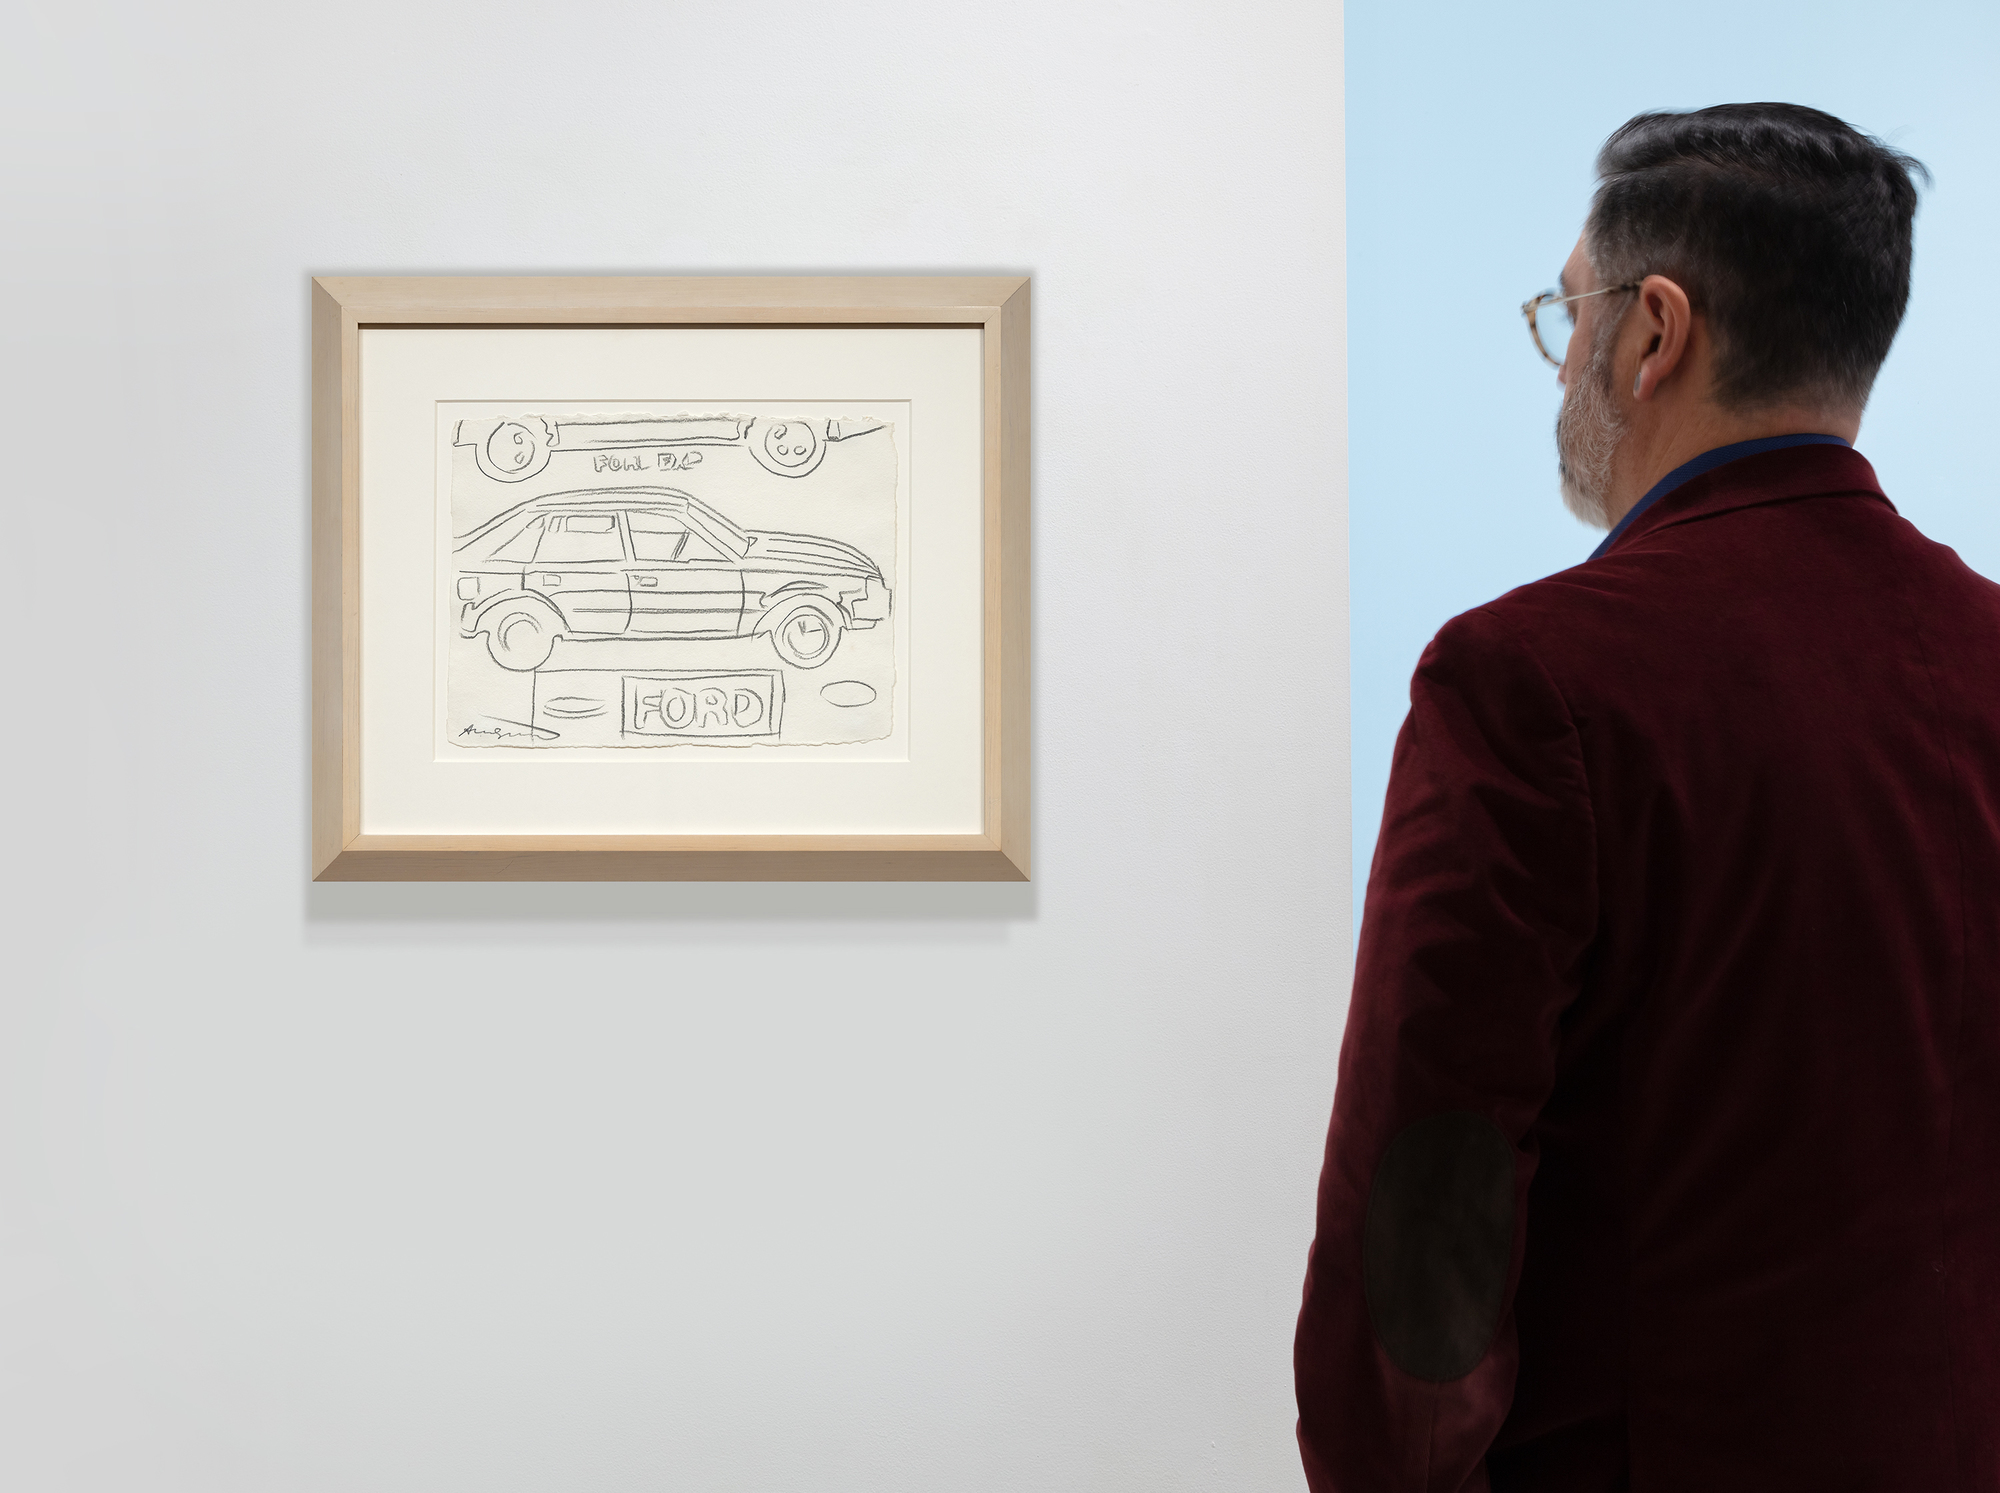 ANDY WARHOL - Voiture Ford - graphite sur papier - 11 1/2 x 15 3/4 in.